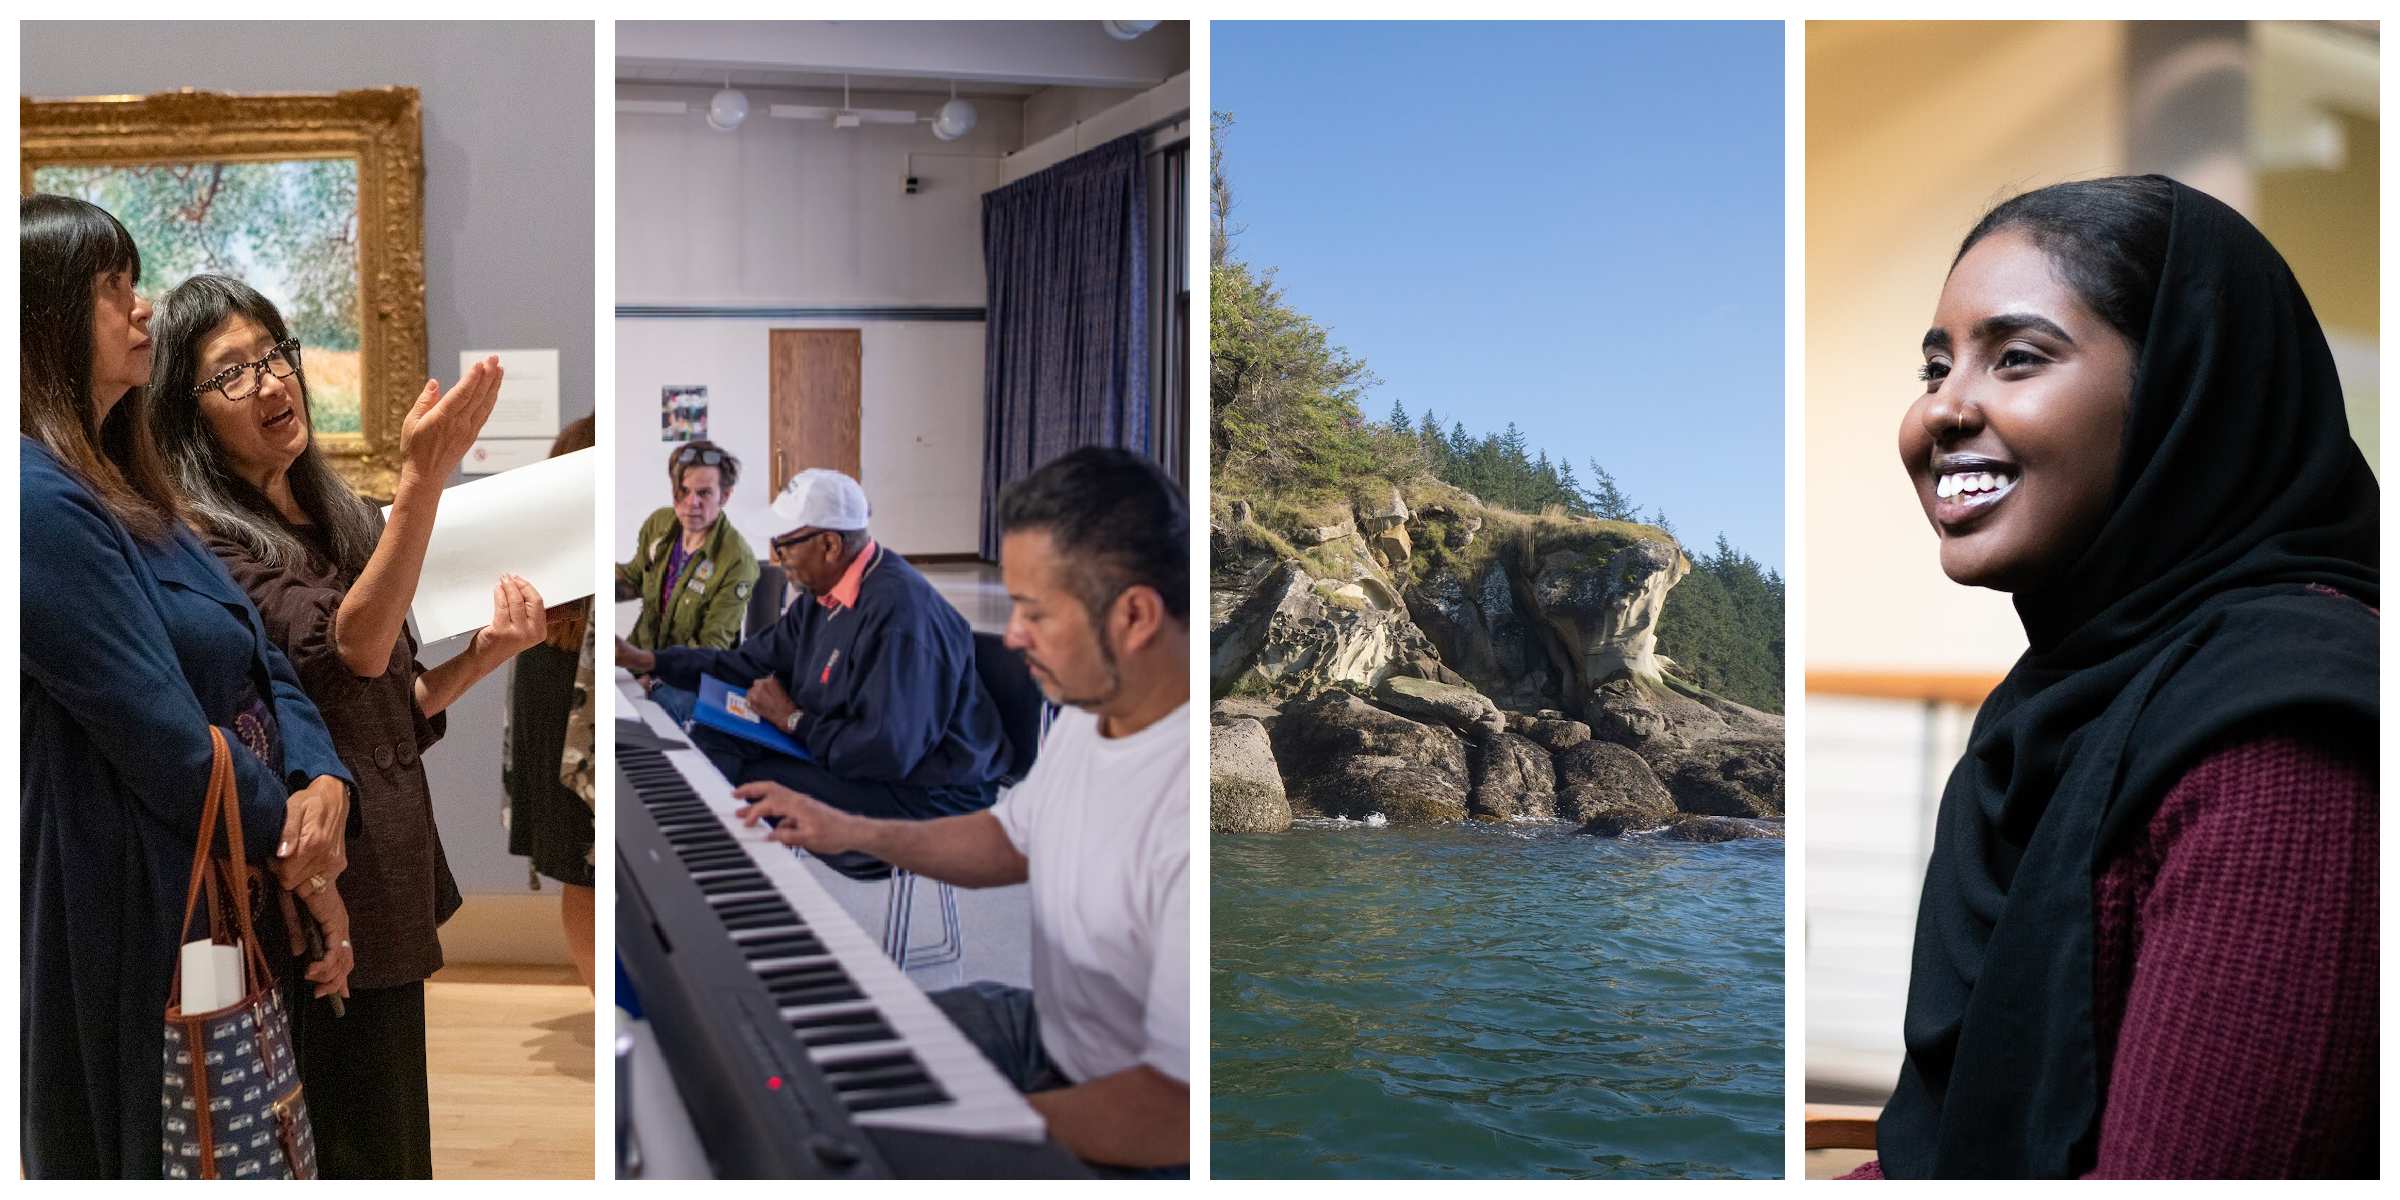 Image 1: two woman talk while looking at a painting in an art museum. Image 2: three adults play piano. Image 3: a rock formation next to water. Image 4: a woman with dark hair wearing a hijab smiles at something off-camera. 